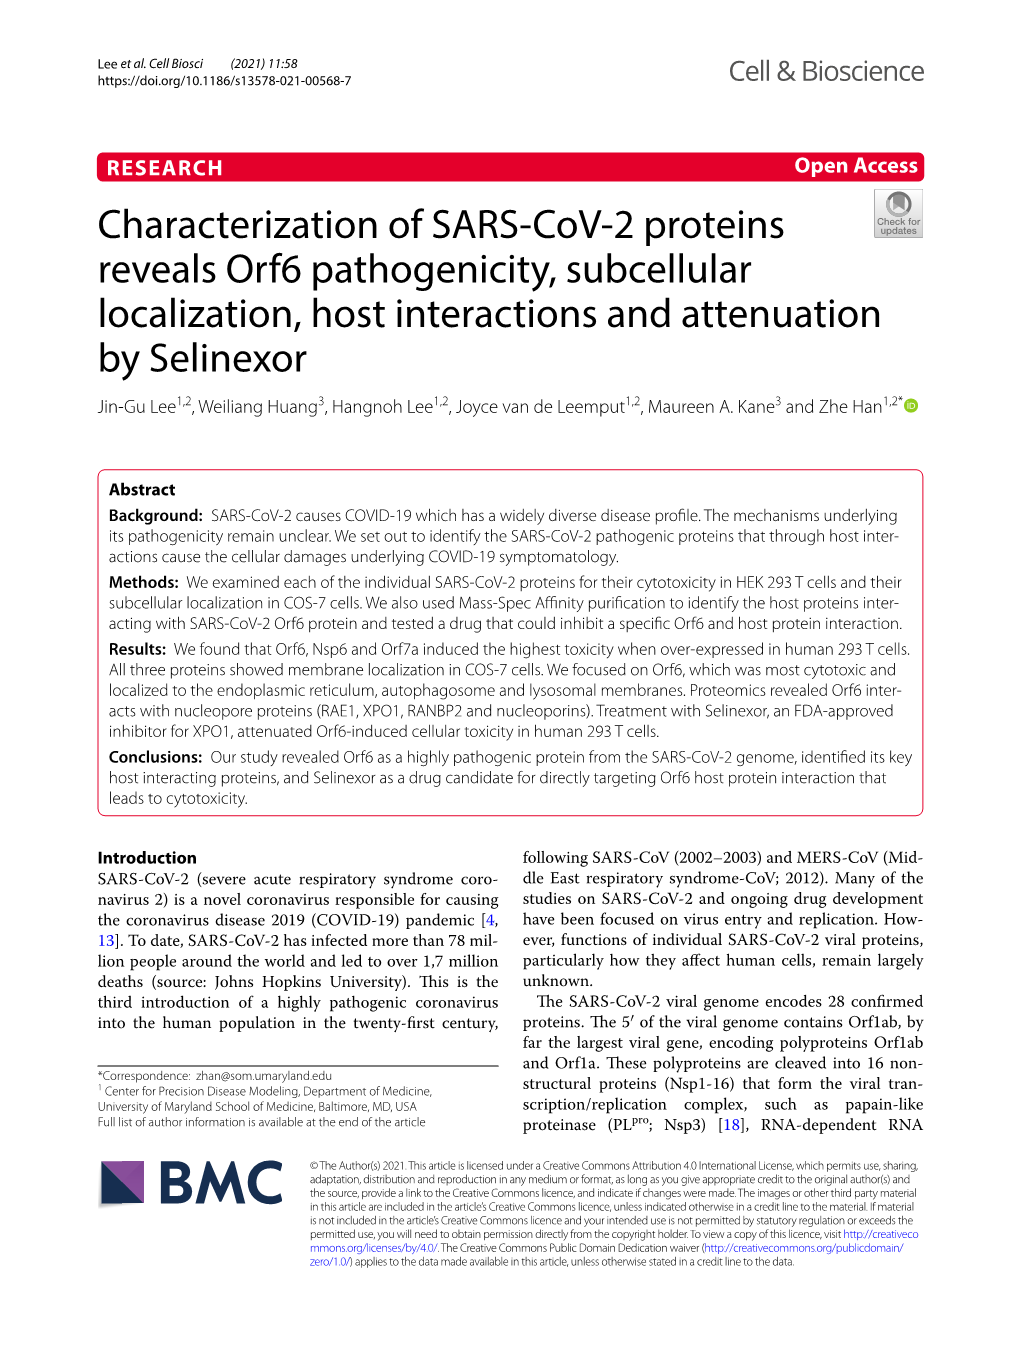 Characterization of SARS-Cov-2 Proteins Reveals Orf6 Pathogenicity